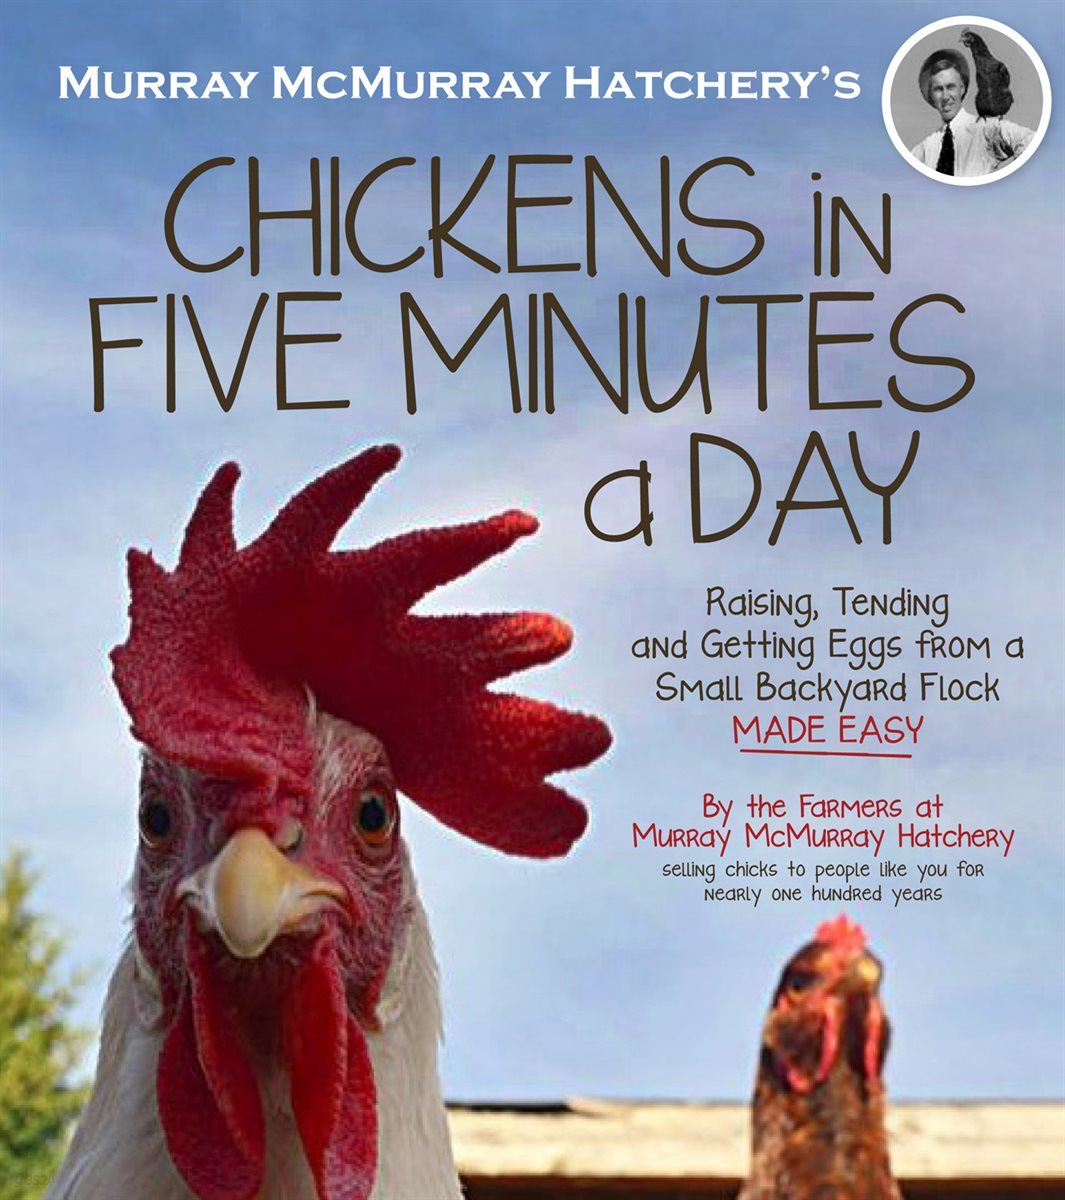 Murray McMurray Hatchery&#39;s Chickens in Five Minutes a Day